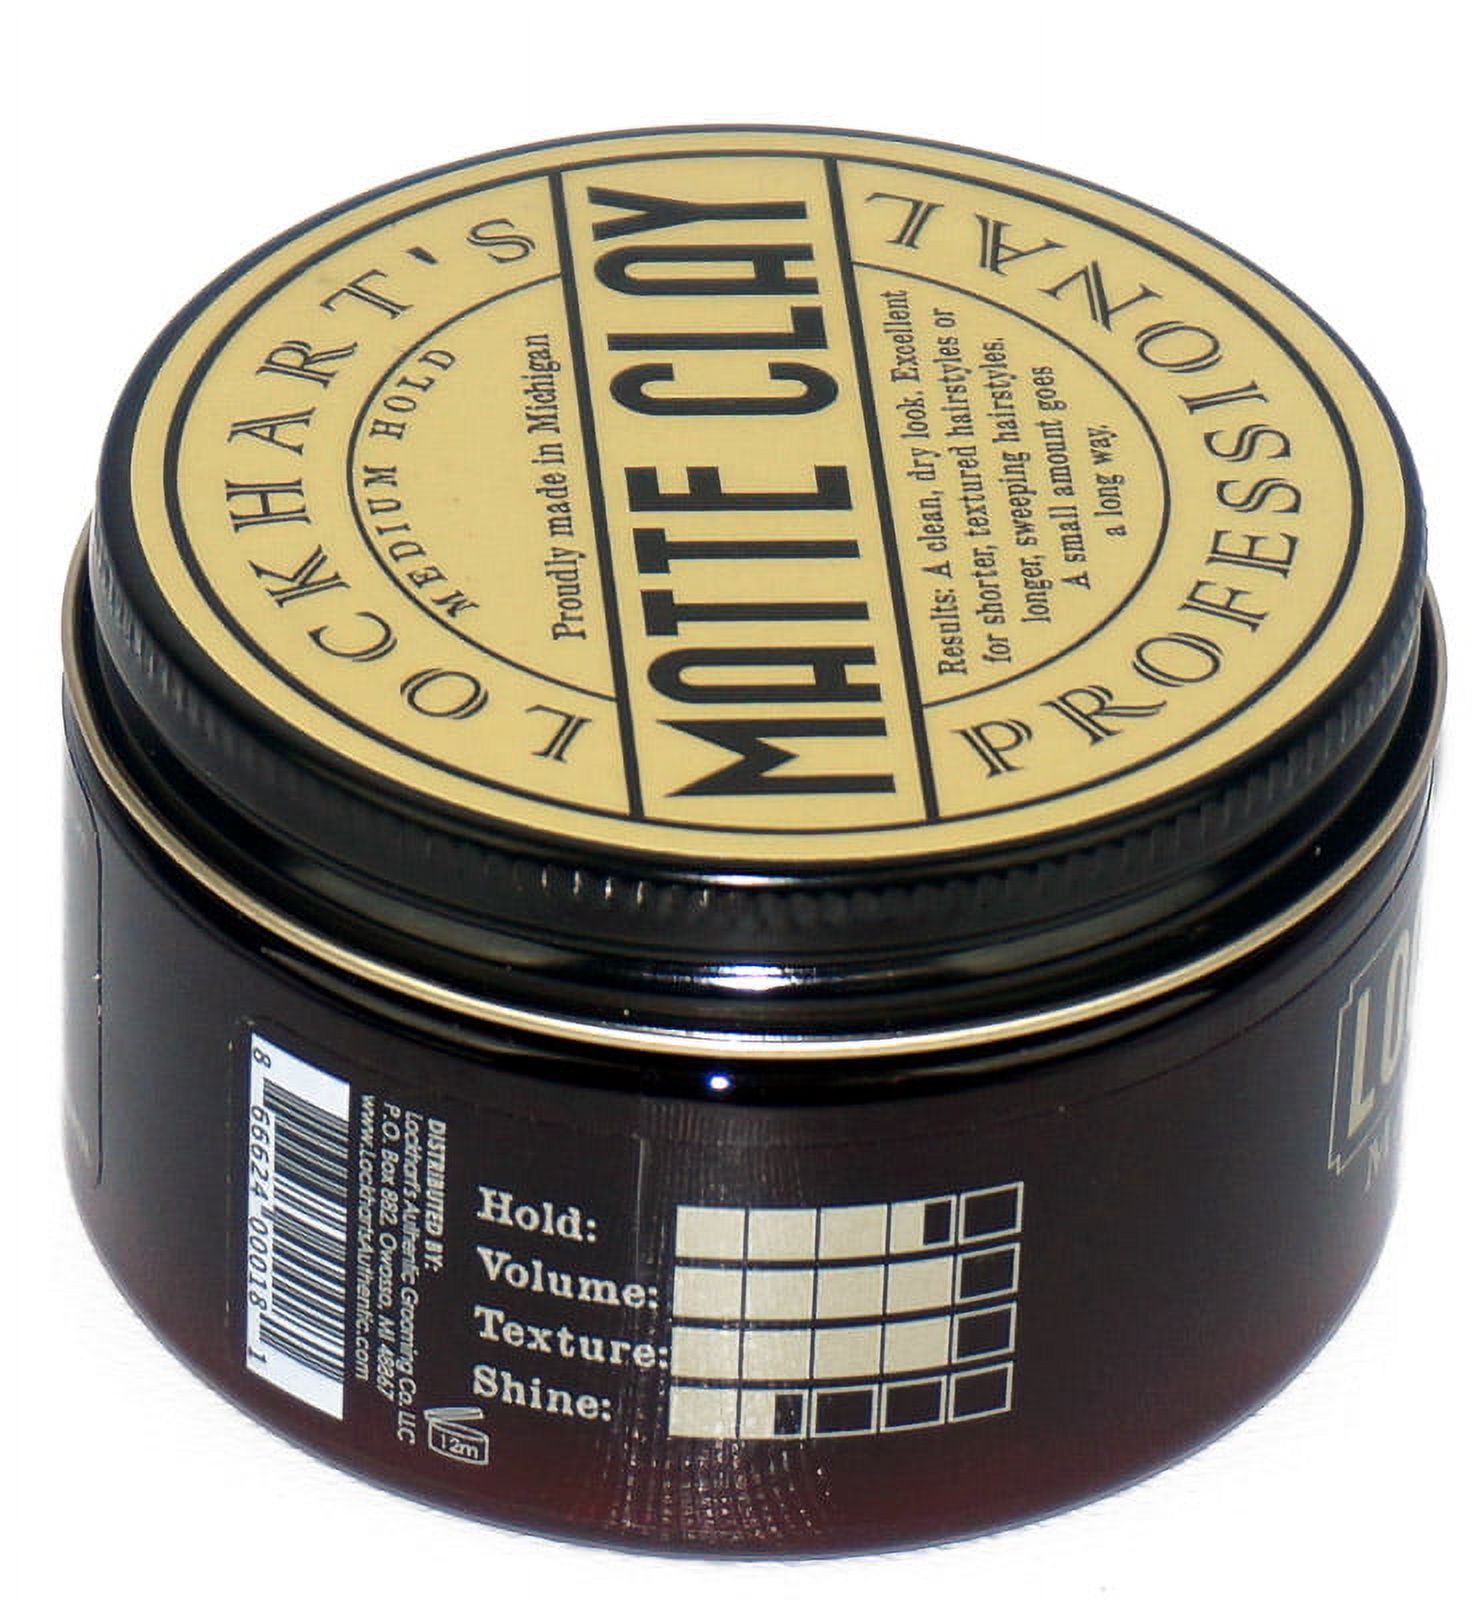 LOCKHART'S Professional Matte Clay Hair Pomade 3.7 oz - image 3 of 3